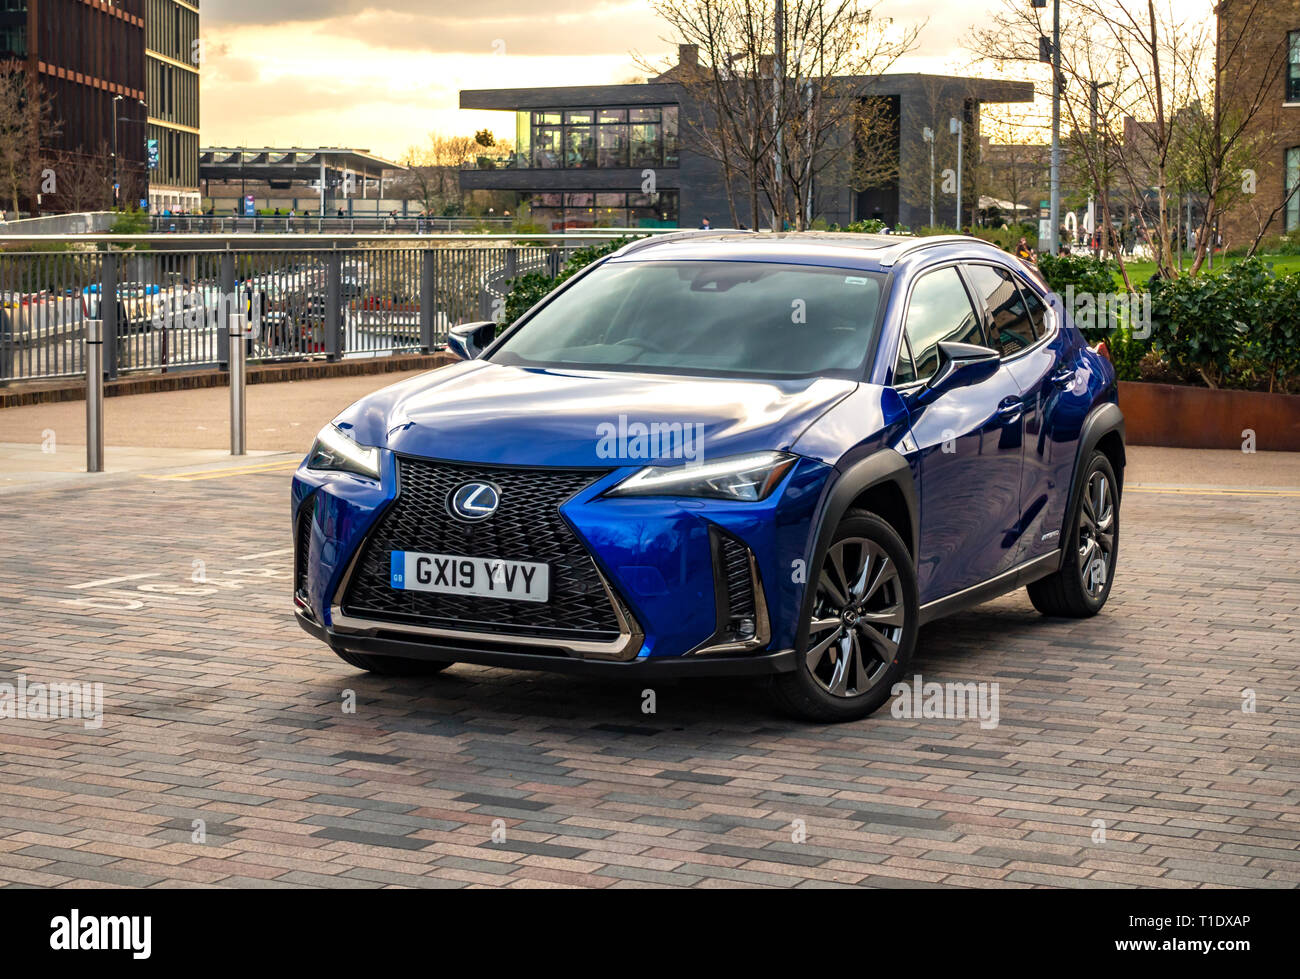 Car front view of a Blue brand new released The Lexus UX Hybrid high-riding soft-roader car parked in Kings Cross, London Stock Photo